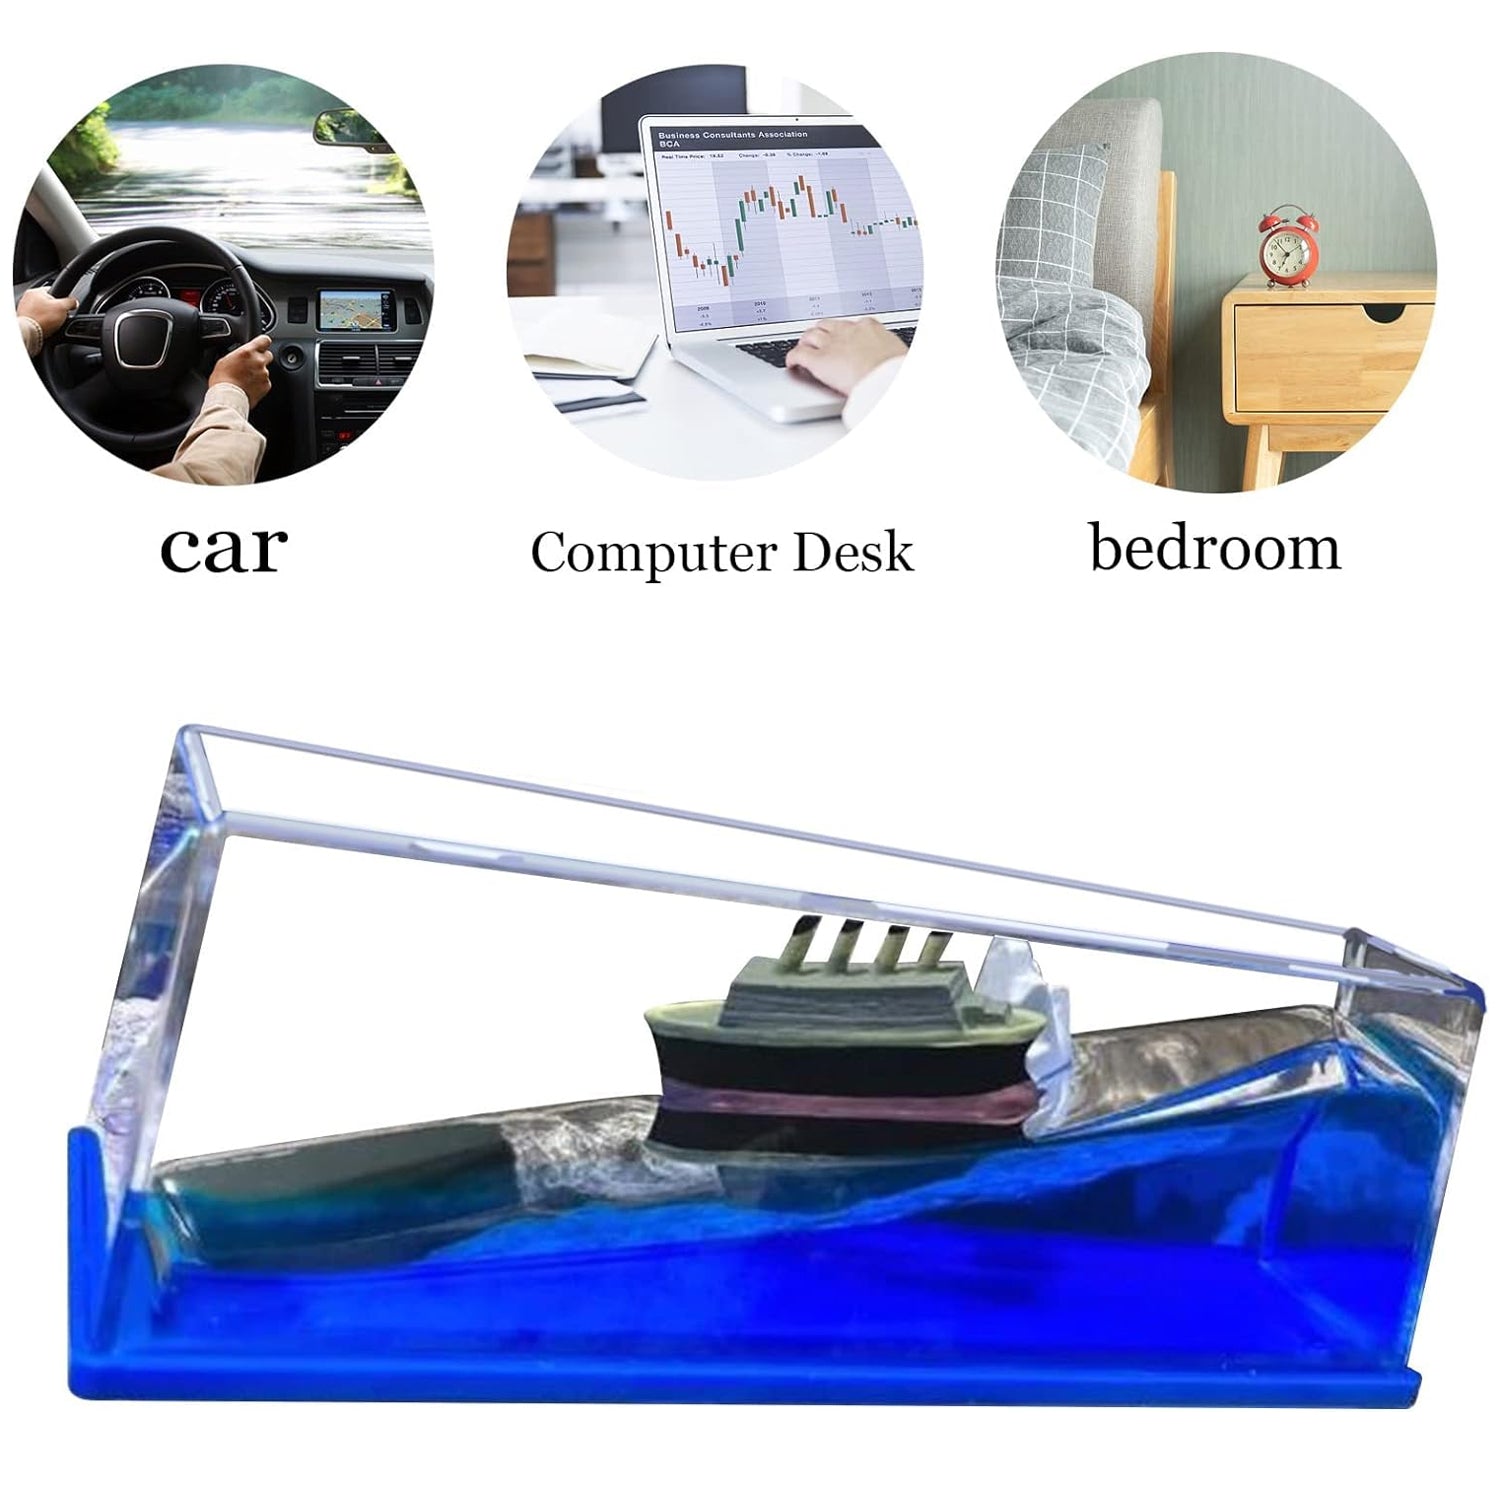 7589 Car Interior Dashboard Decoration Floating Water Cruiser Ship Iceberg Ornament Car Interior Decoration for Birthday Gifts, Home Decor Suitable for Home Show Car Decoration, Gifts, Desk or Paperweight